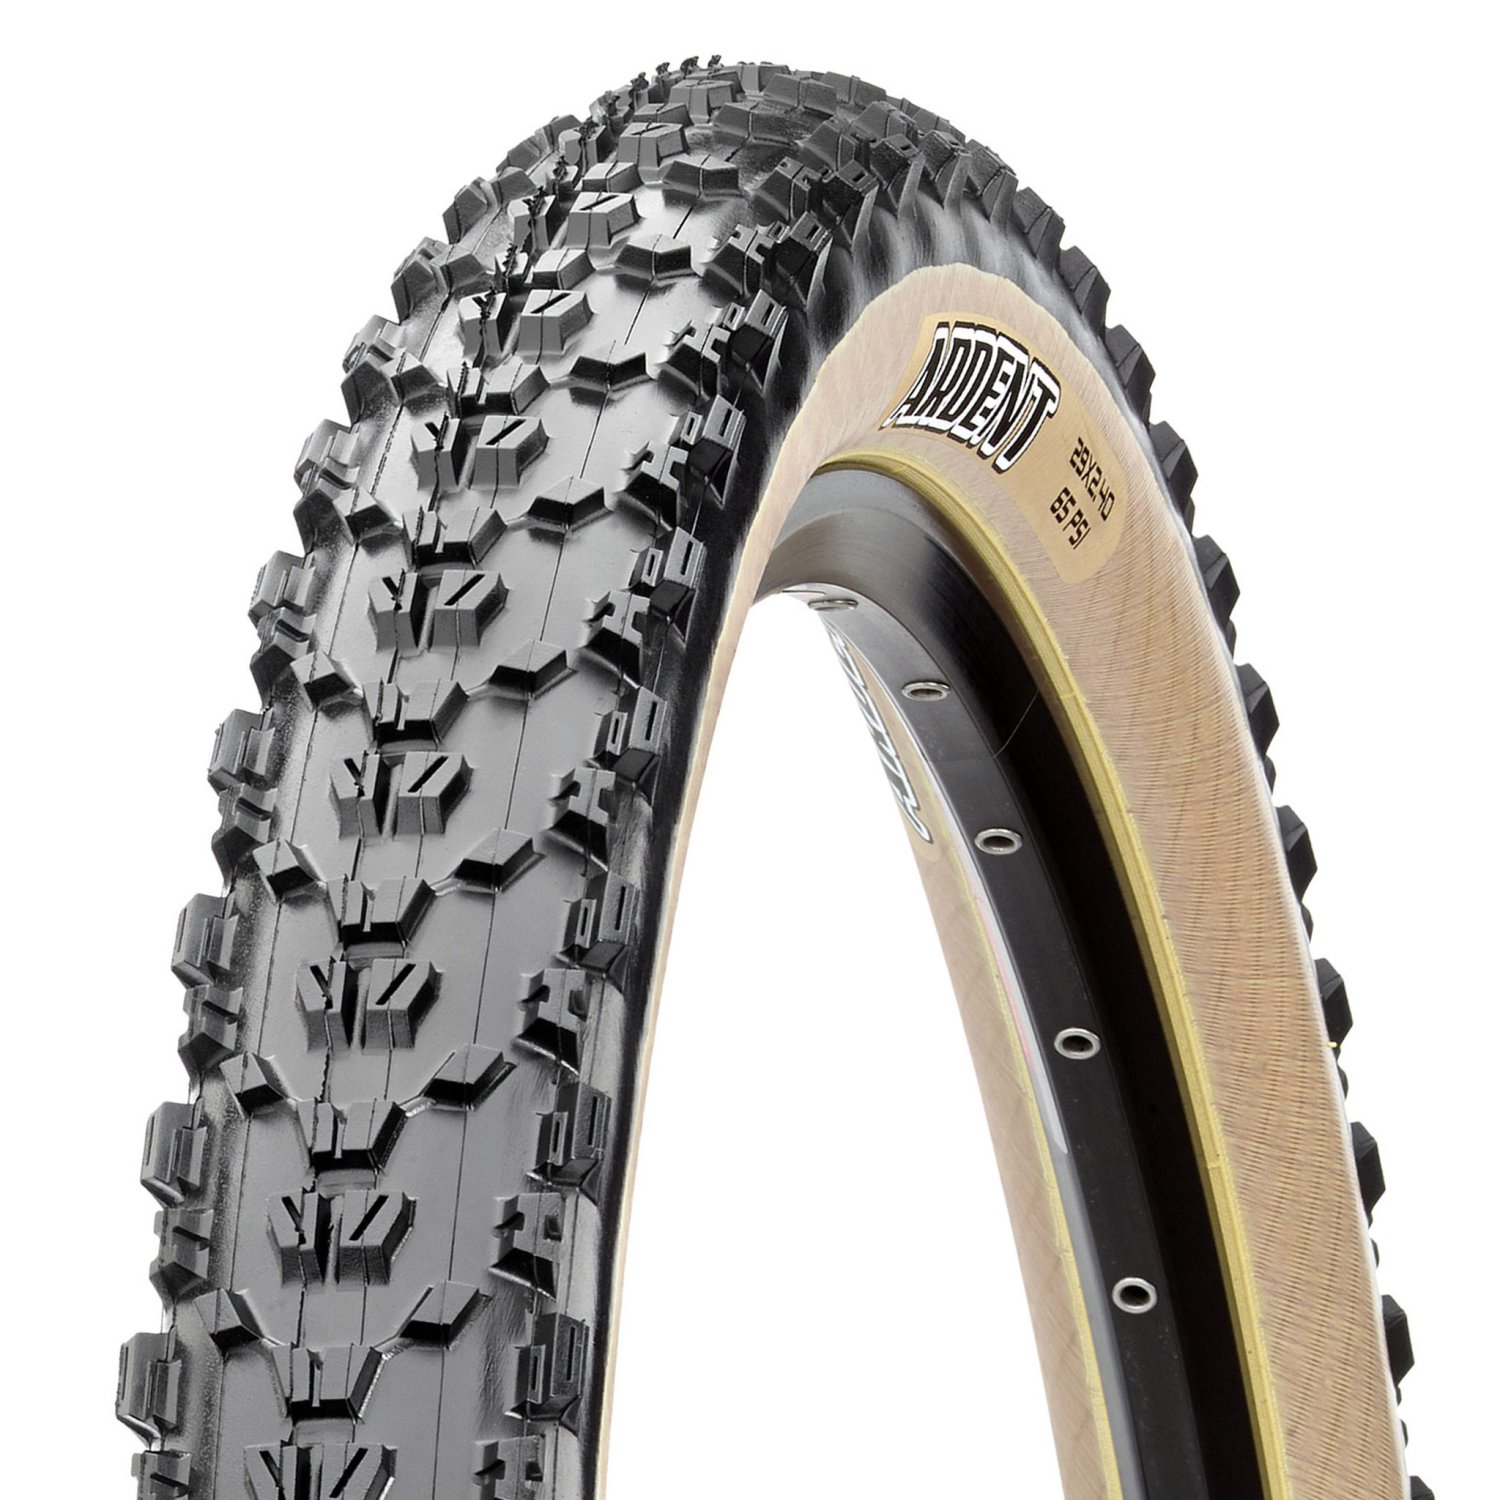 Покрышка велосипедная Maxxis Ardent-Tanwall, 29x2.4, 60 TPI wire 60a, TB96789100 покрышка велосипедная maxxis rekon 29x2 4 m349ru wt foldable tlr etb00017700